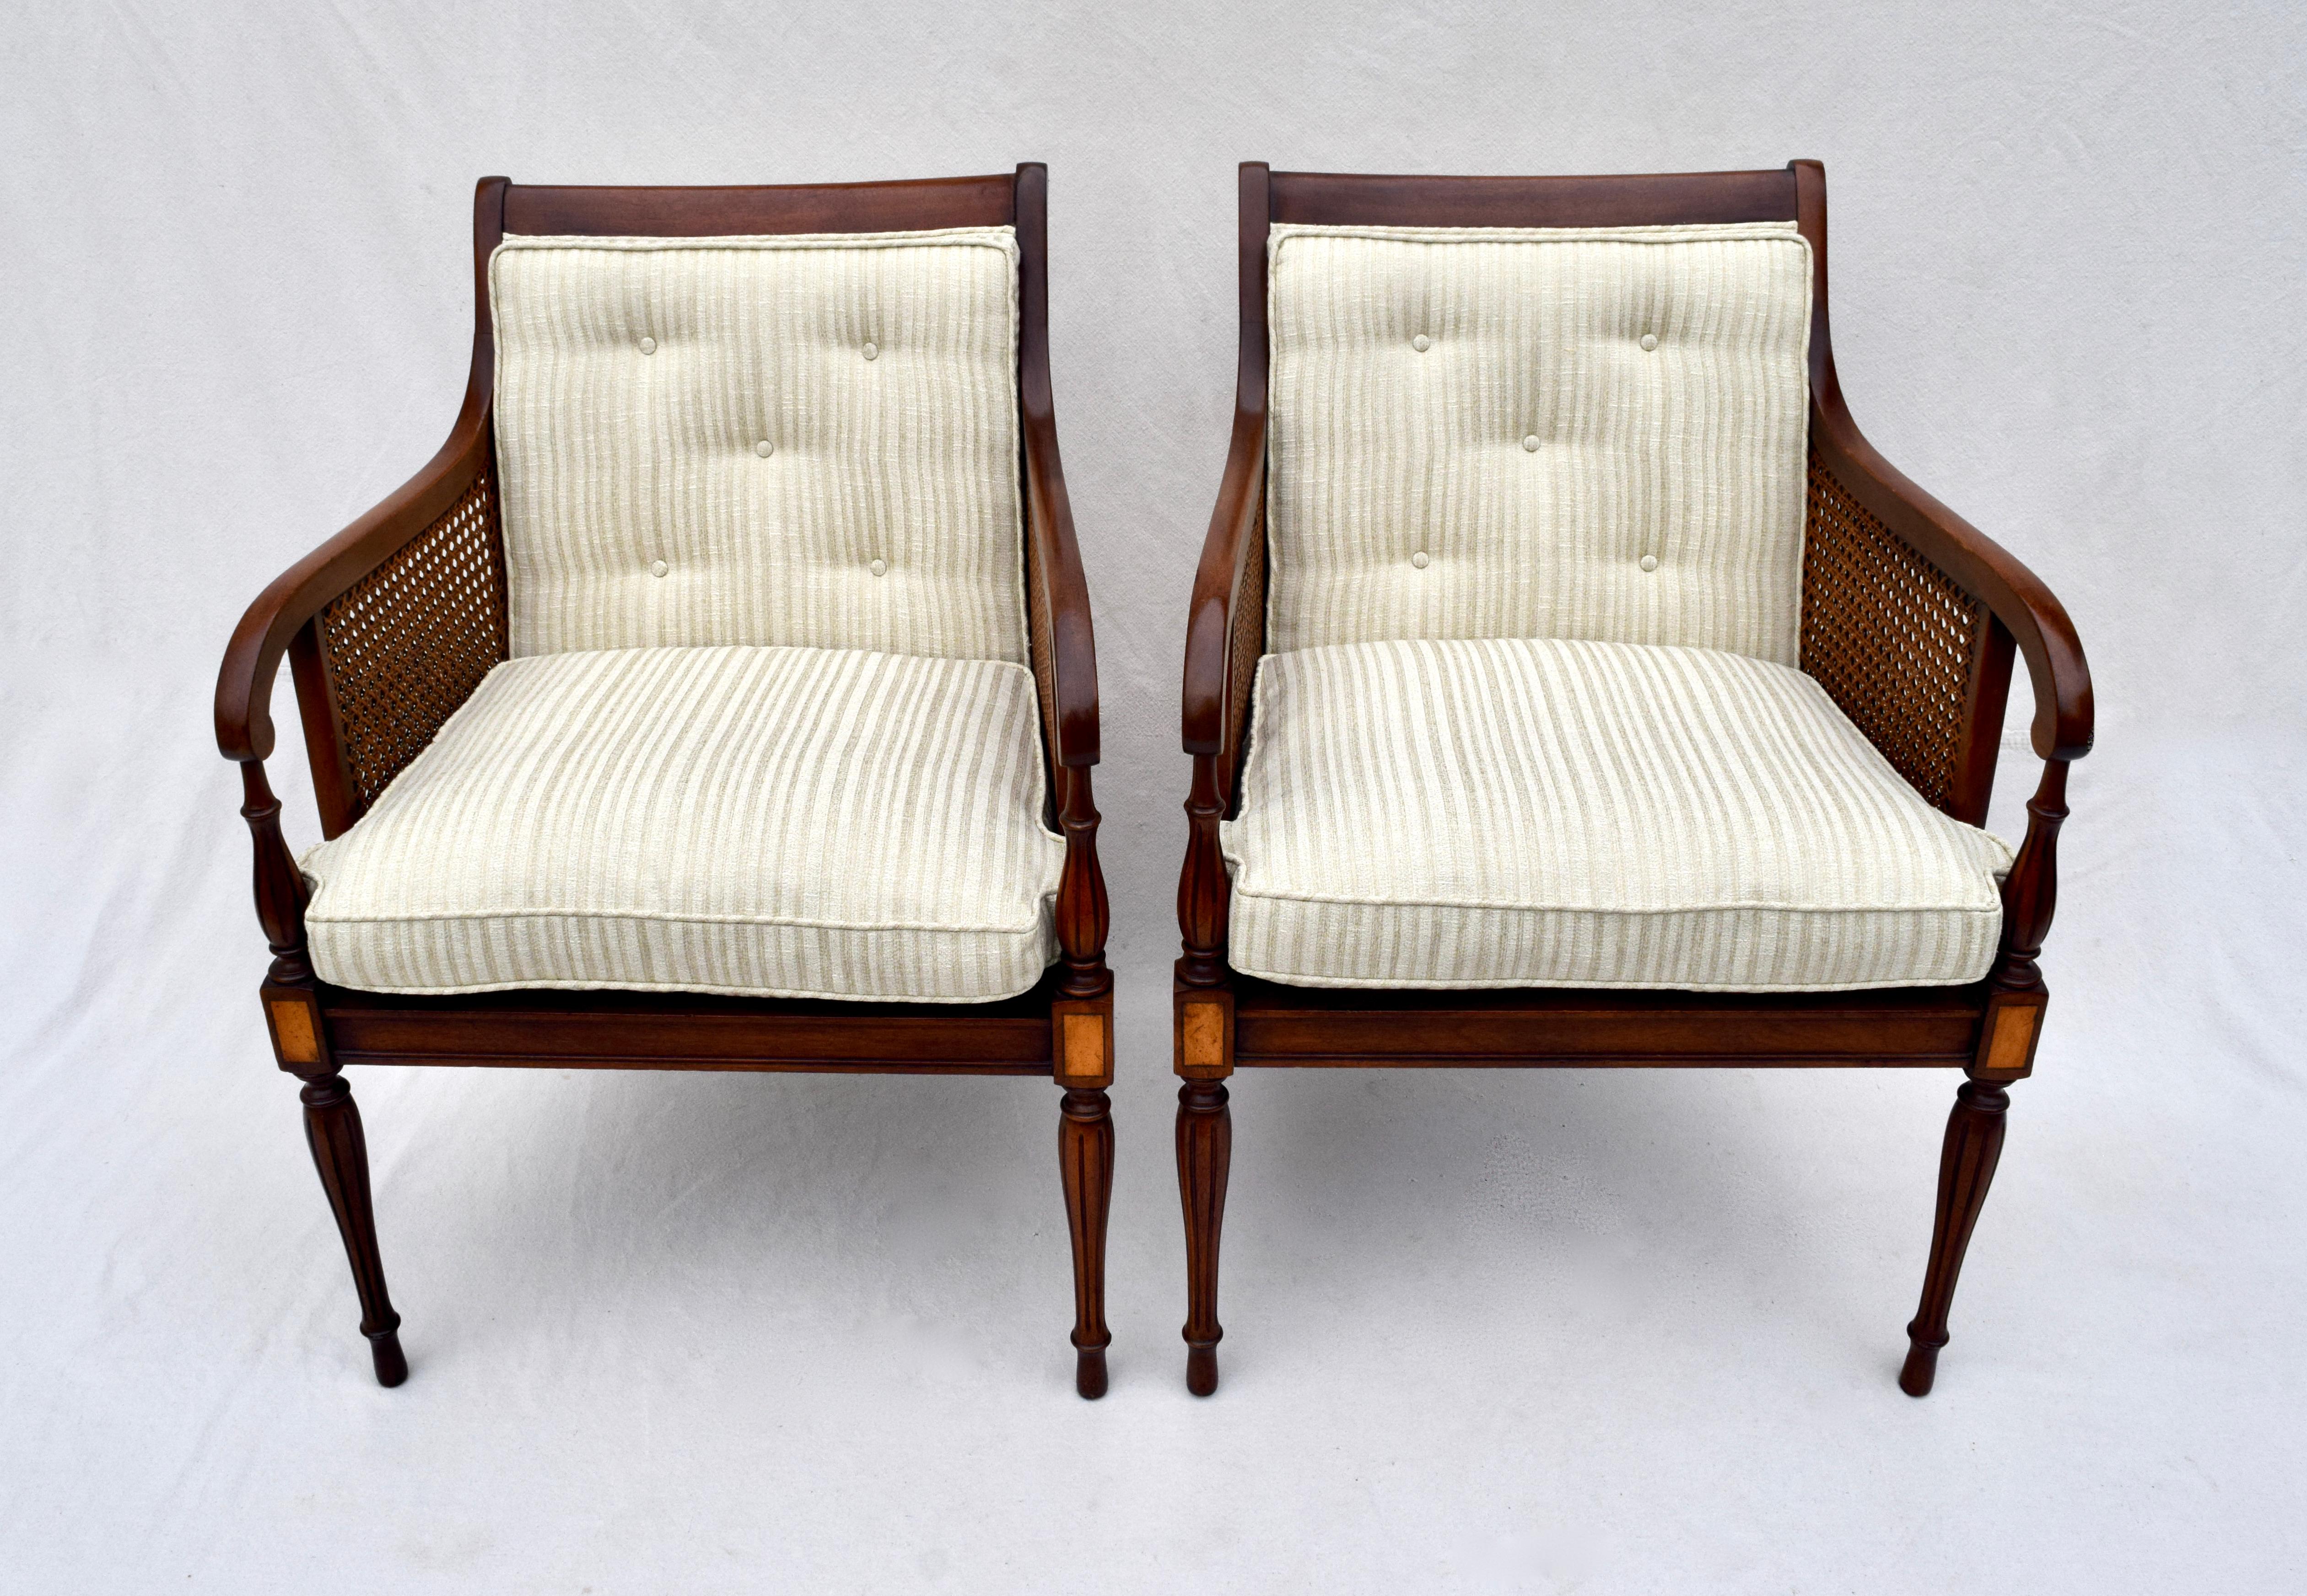 A pair of double caned, George III Regency style mahogany & satinwood armchairs with tapered reed & turned legs. The pair is fully hand detailed with beautifully maintained caning well in tact.. New silk stripe upholstery includes button tufted back